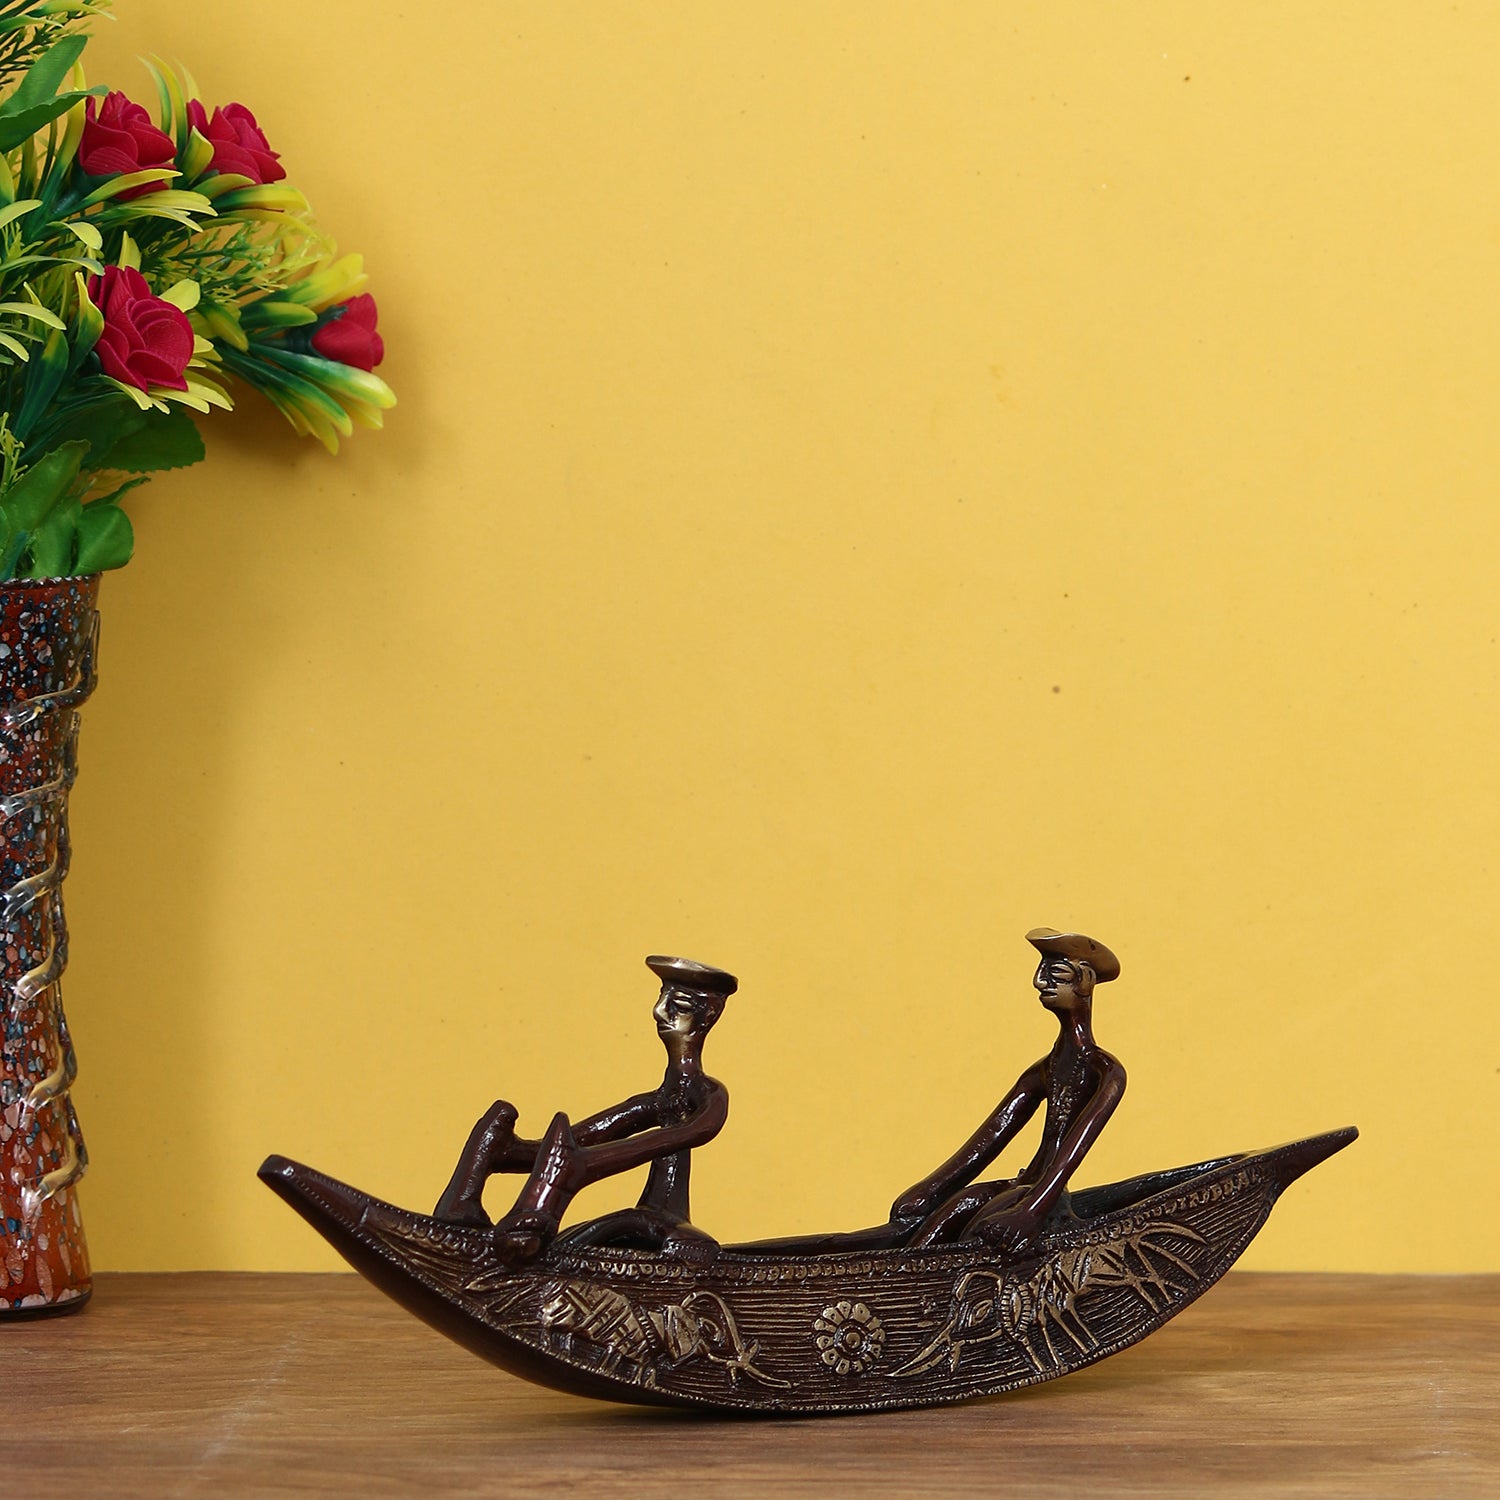 Designer Pearl Rakhi with Antique Finish 2 Men in Boat Brass Decorative Showpiece and Roli Chawal Pack, Best Wishes Greeting Card 2